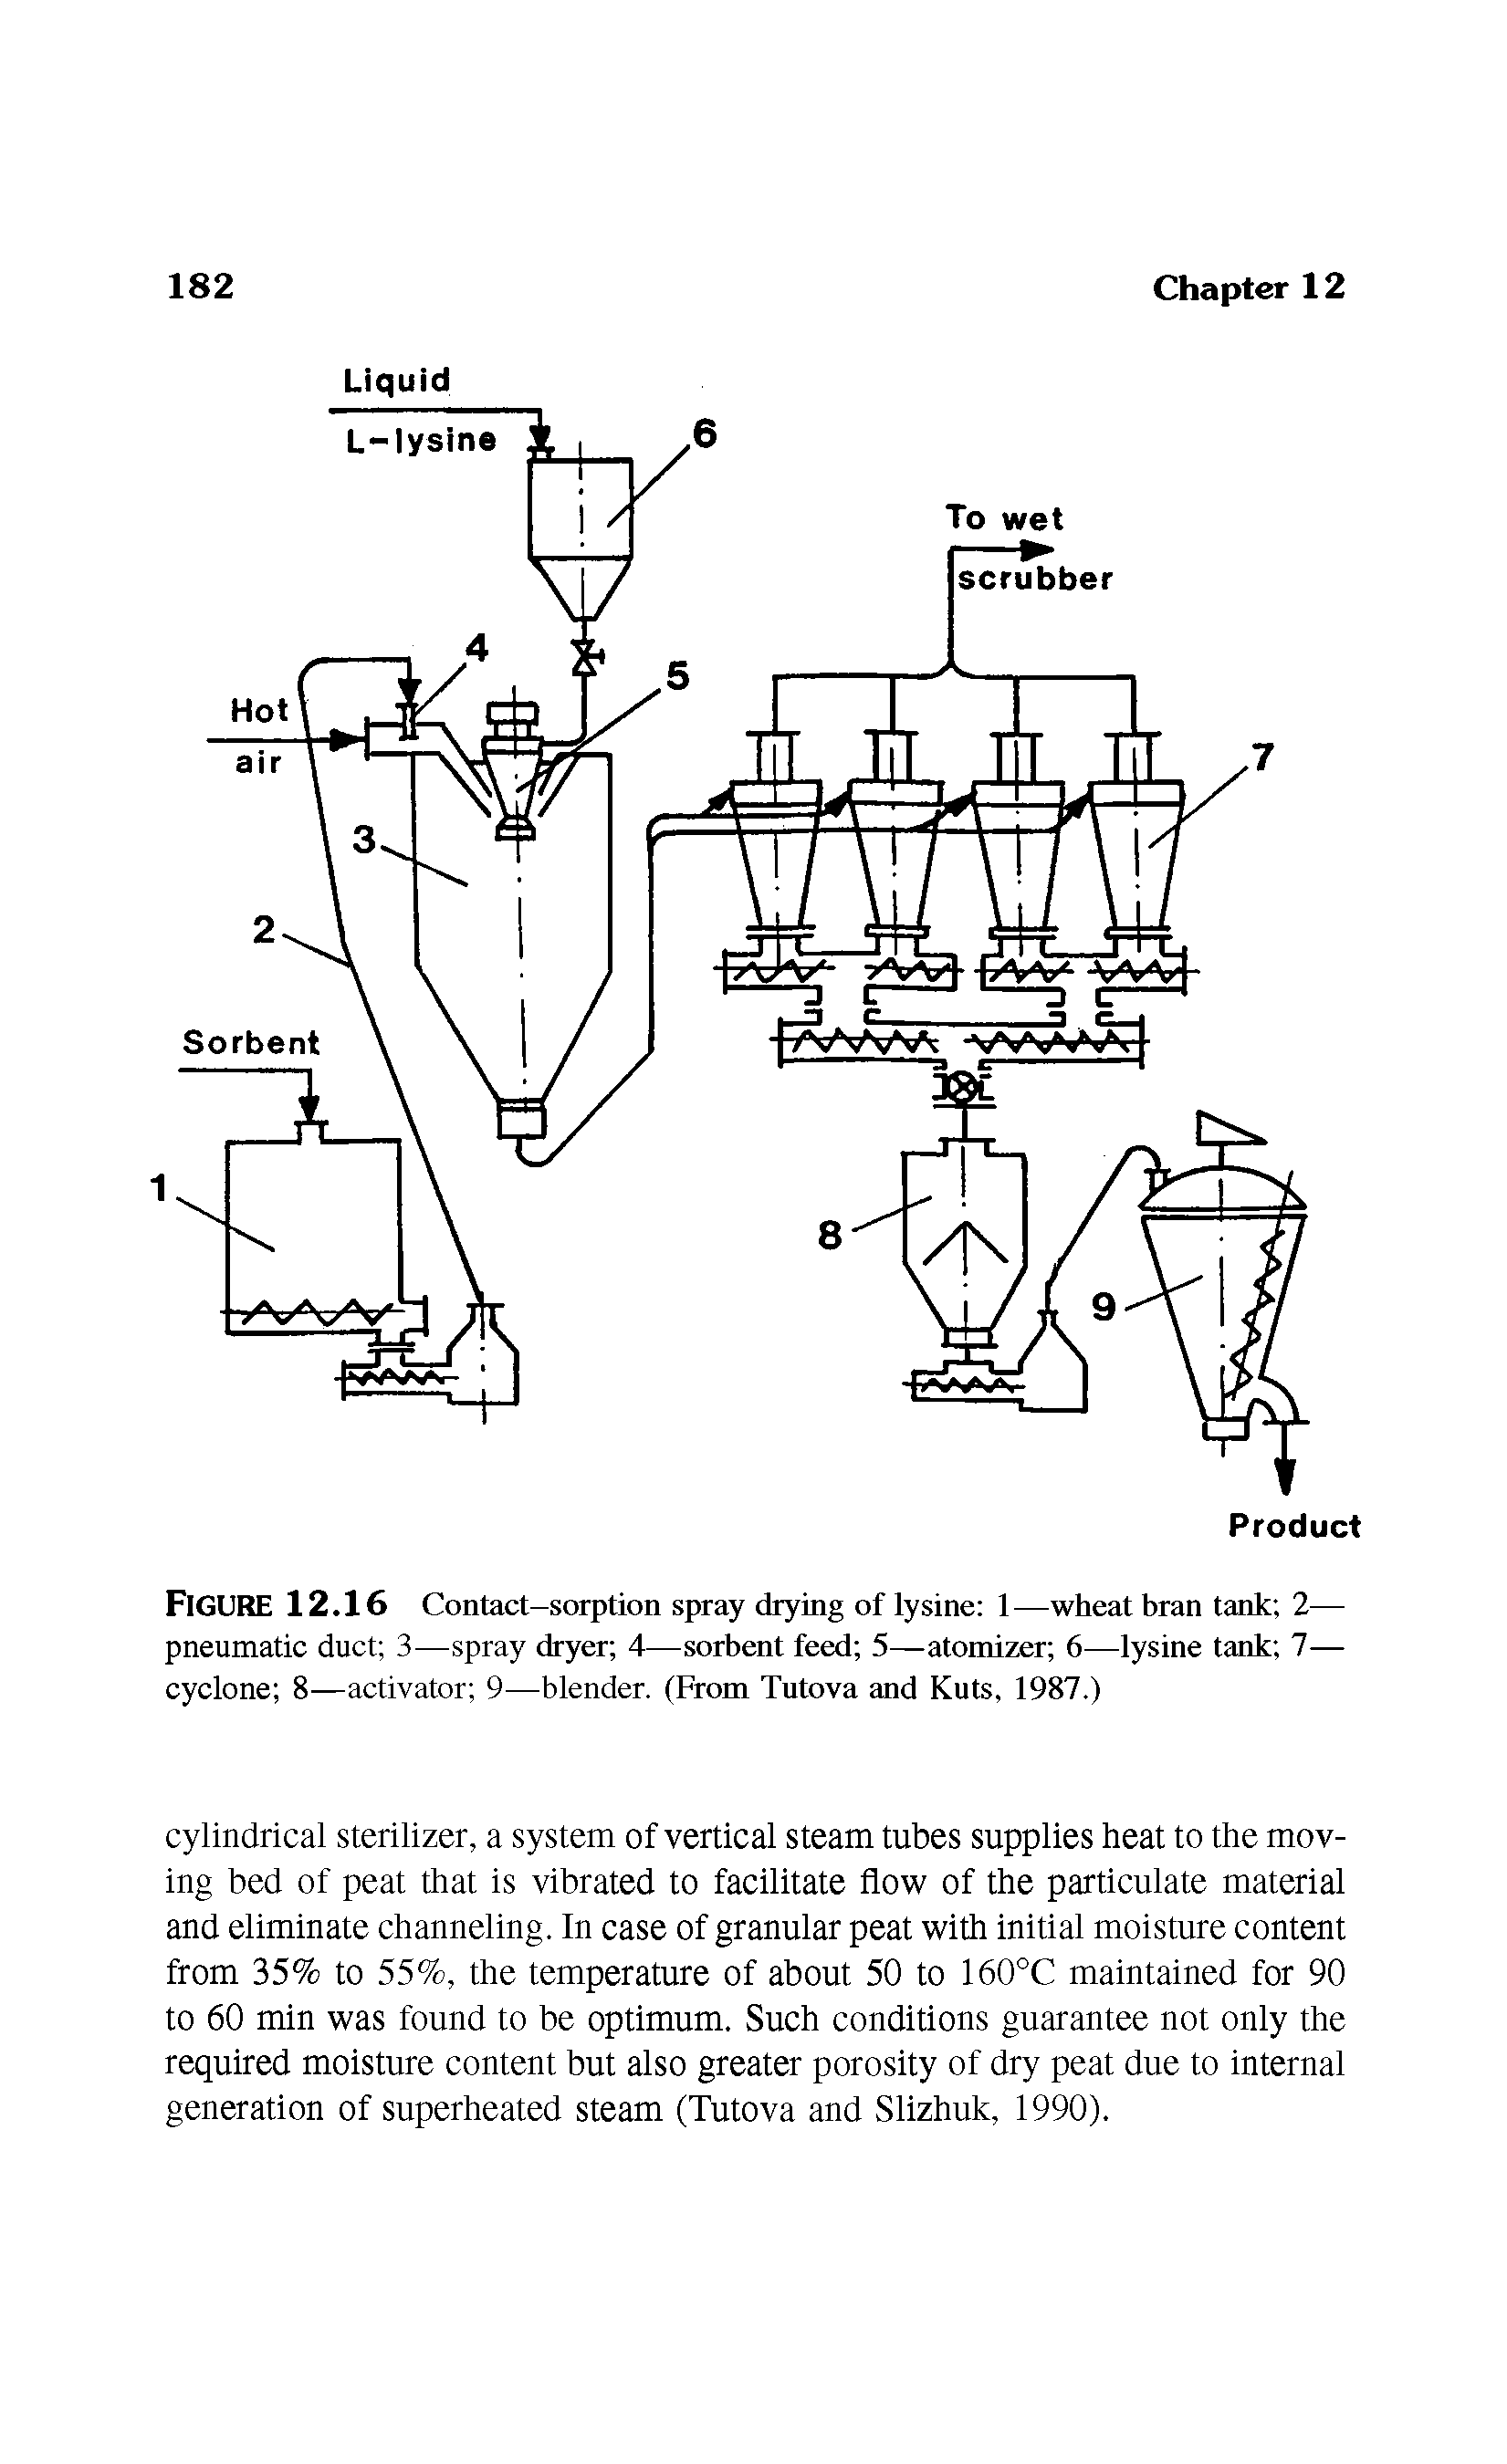 Figure 12.16 Contact-sorption spray drying of lysine 1—wheat bran tank 2— pneumatic duct 3—spray dryer 4—sorbent feed 5—atomizer 6—lysine tank 7— cyclone 8—activator 9—blender. (From Tutova and Kuts, 1987.)...